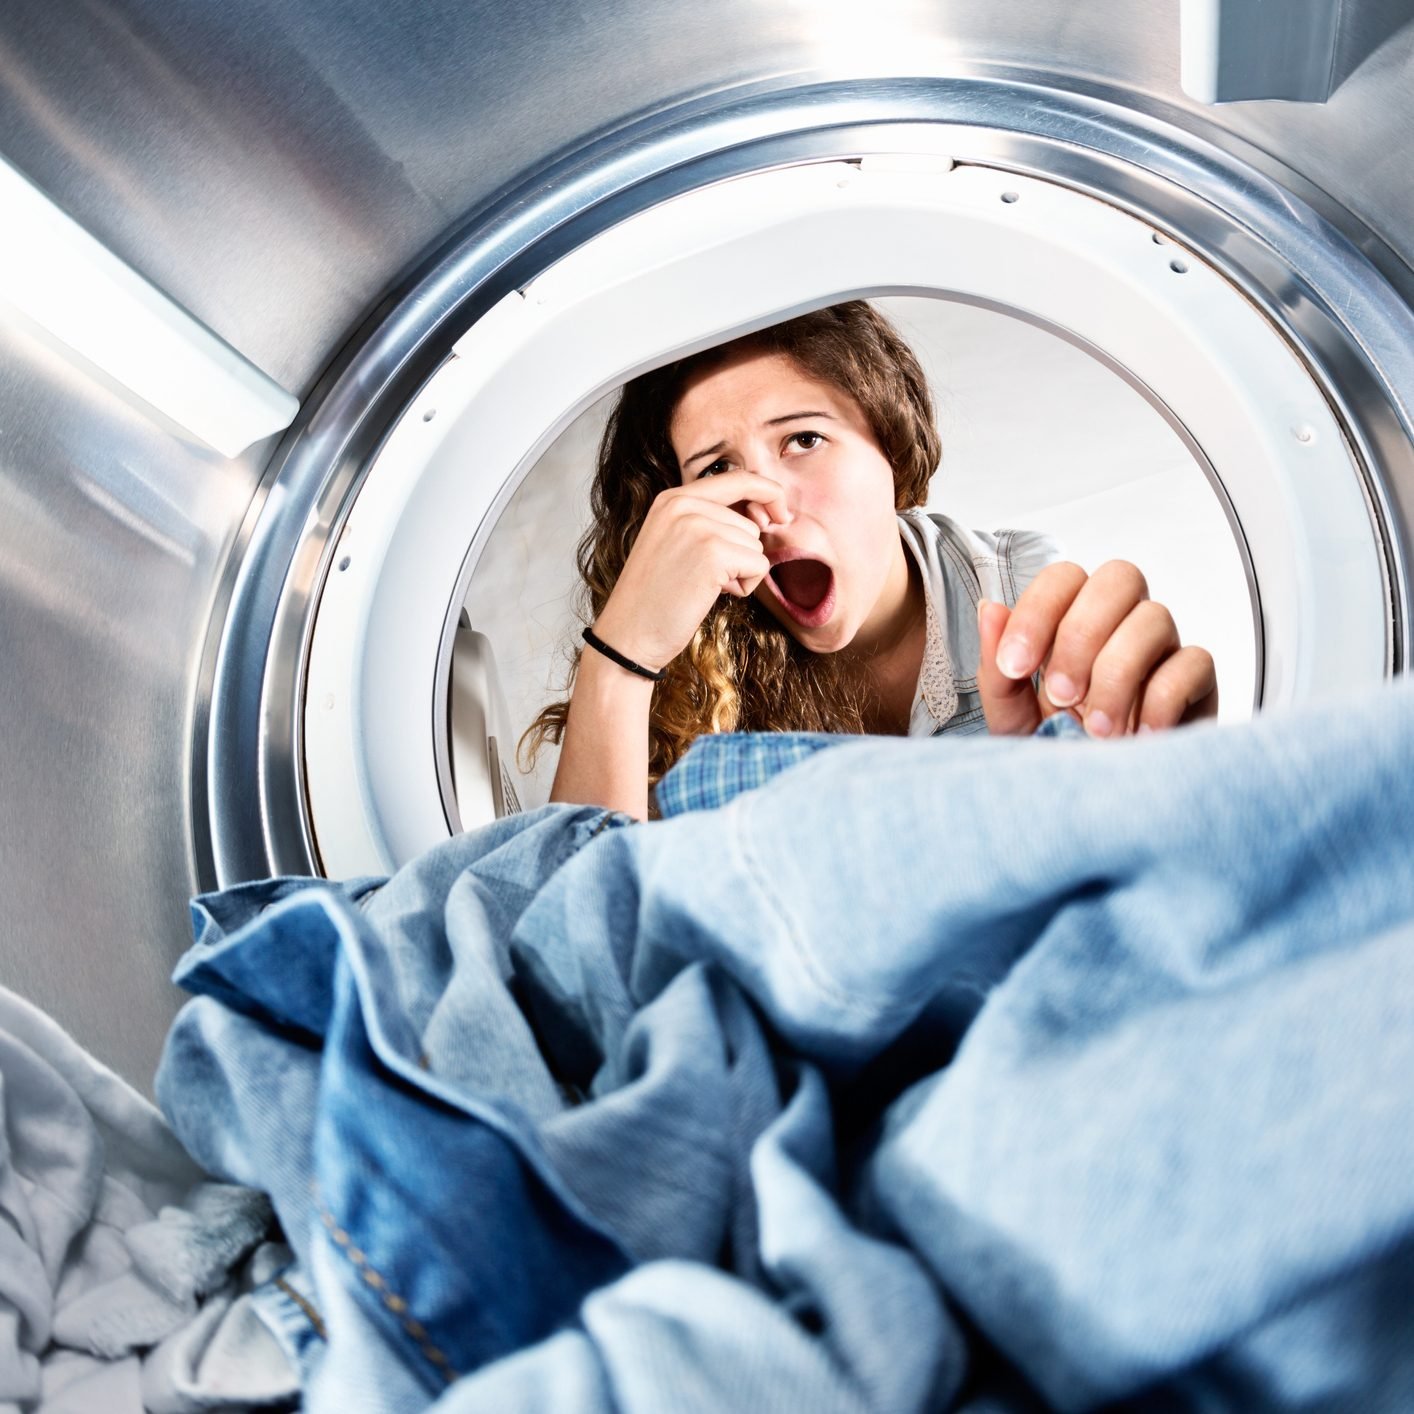 Laundry Left In Clothes Dryer Stinks! Unhappy Woman Holds Nose.